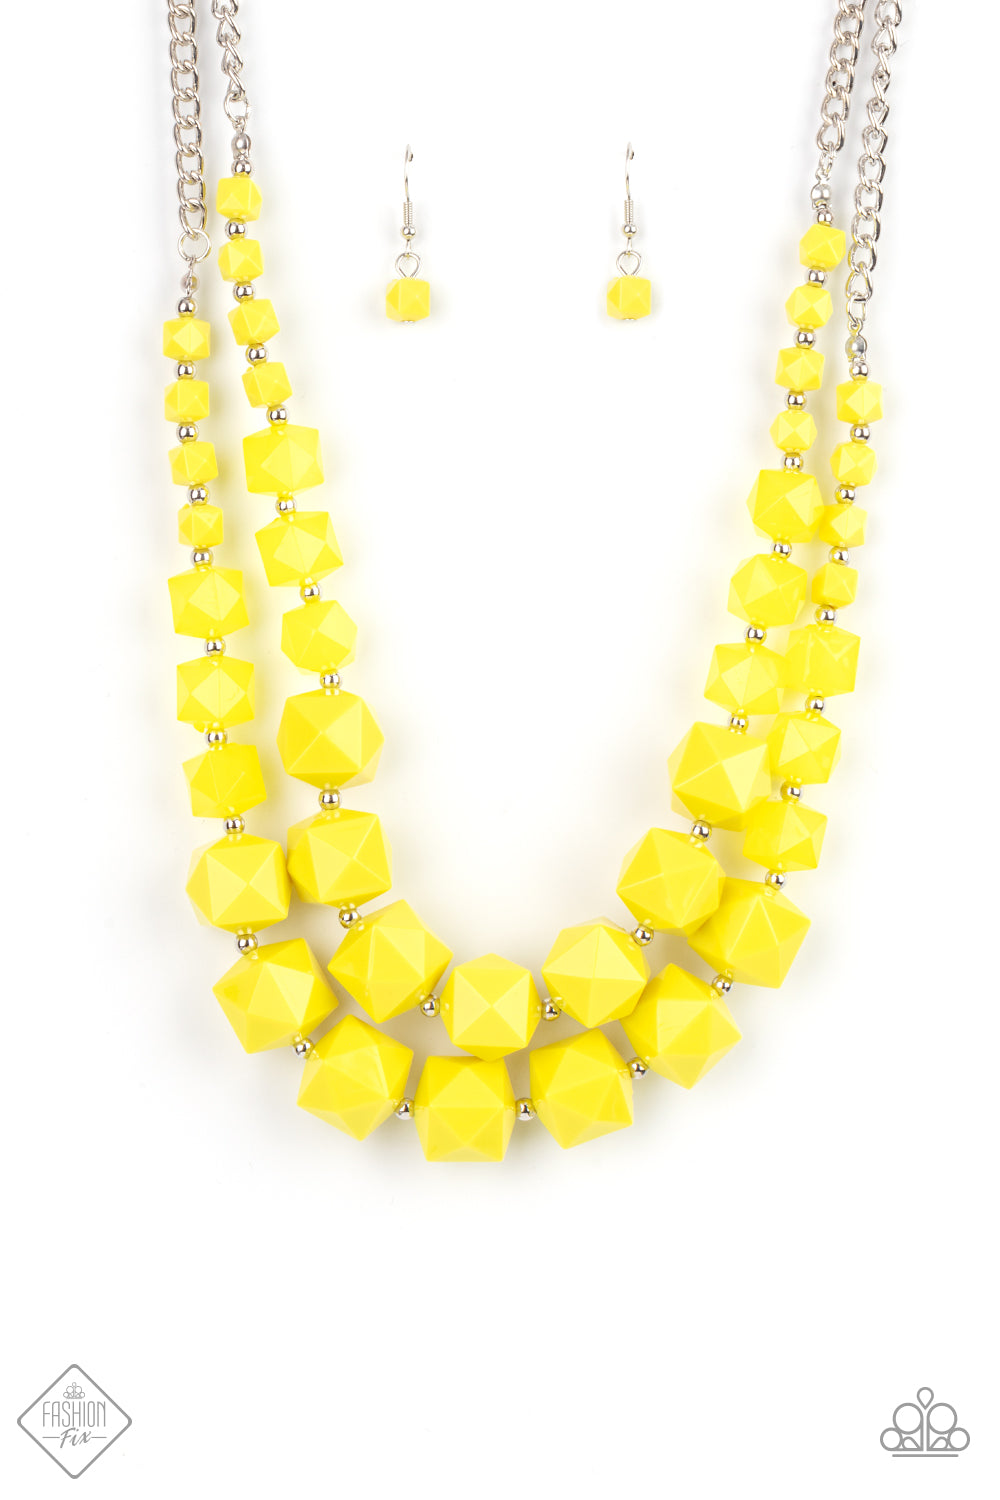 PRE-ORDER - Paparazzi Summer Excursion - Yellow Necklace - Trend Blend Fashion Fix Exclusive - July 2021 - $5 Jewelry with Ashley Swint